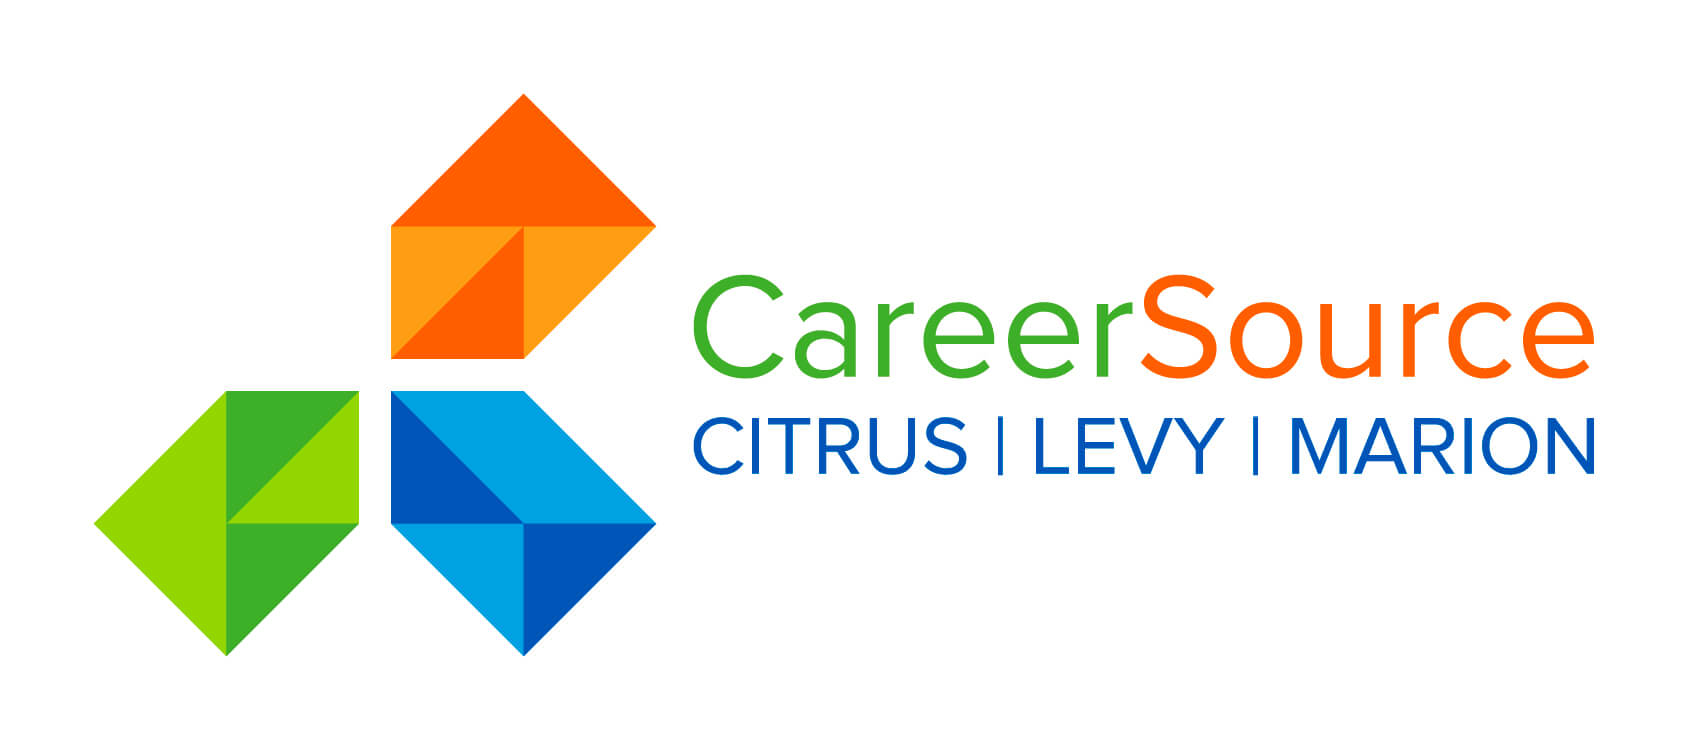 10 Career Source Citrus Levy Marion